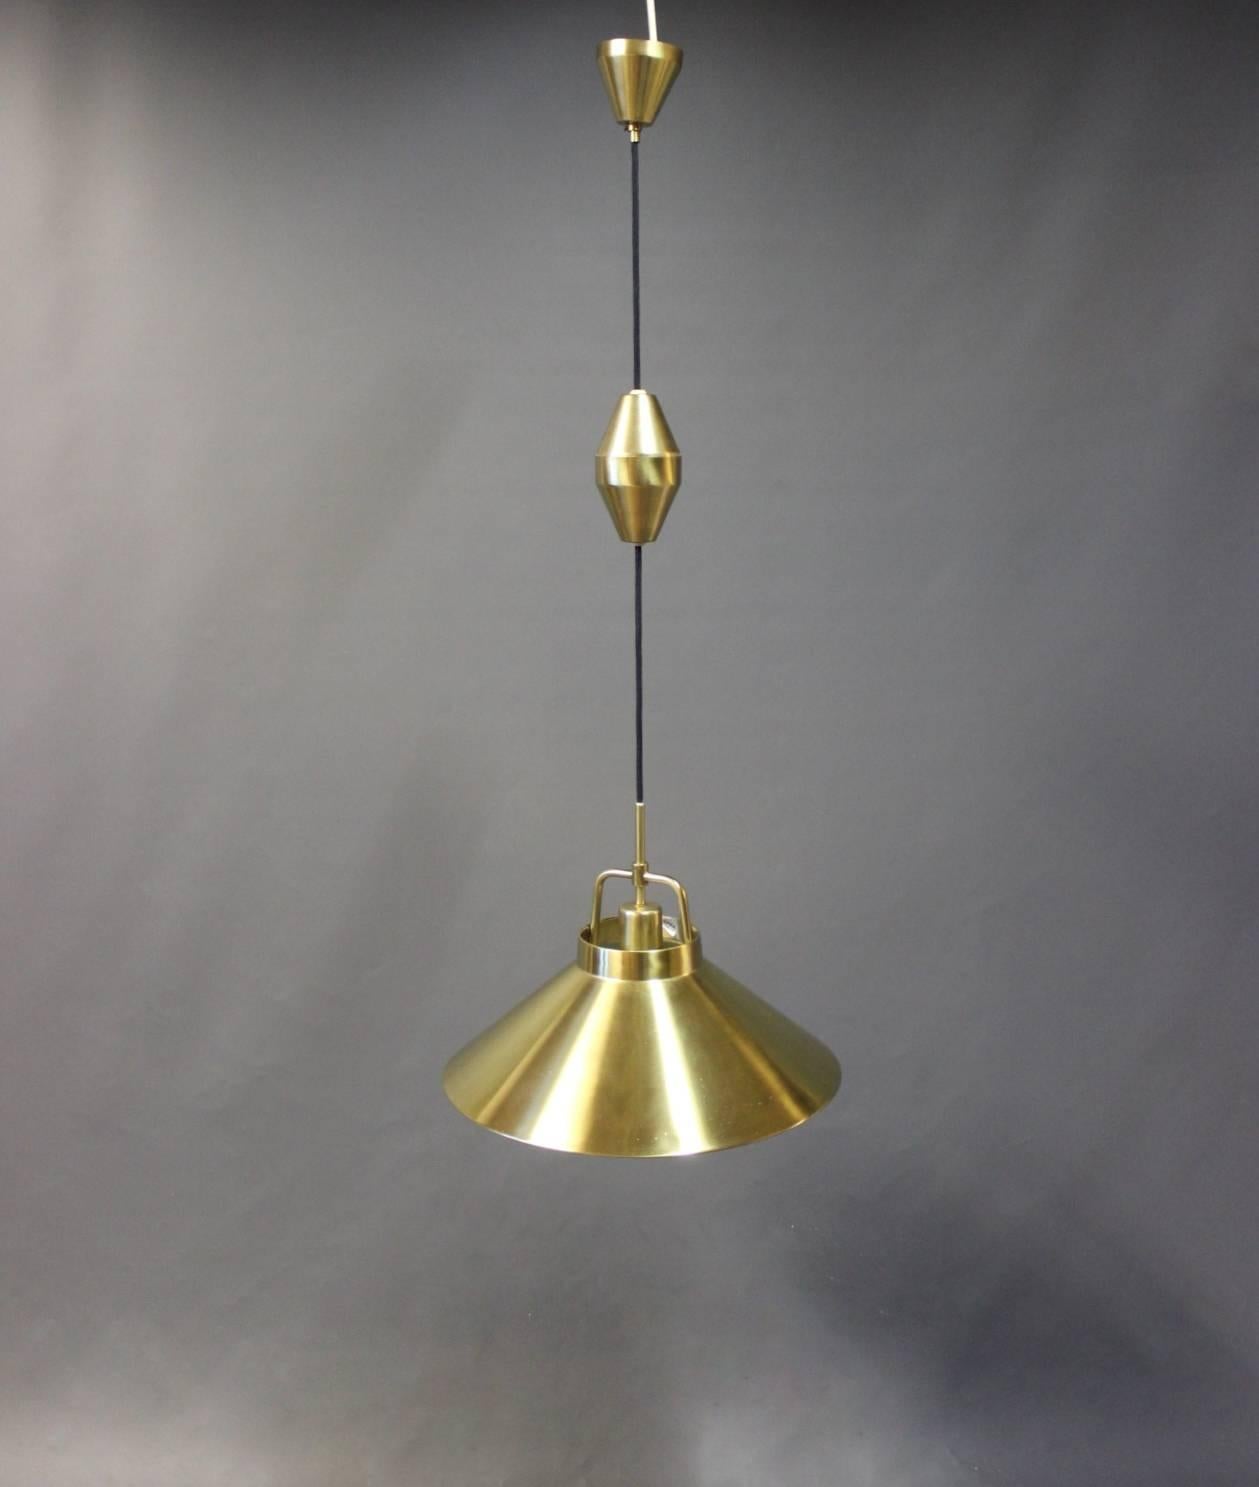 Brass pendant, model P 295, designed by Frits Schlegel for Lyfa. The lenght of the cord can be adjusted. Th pendant is in great vintage condition.